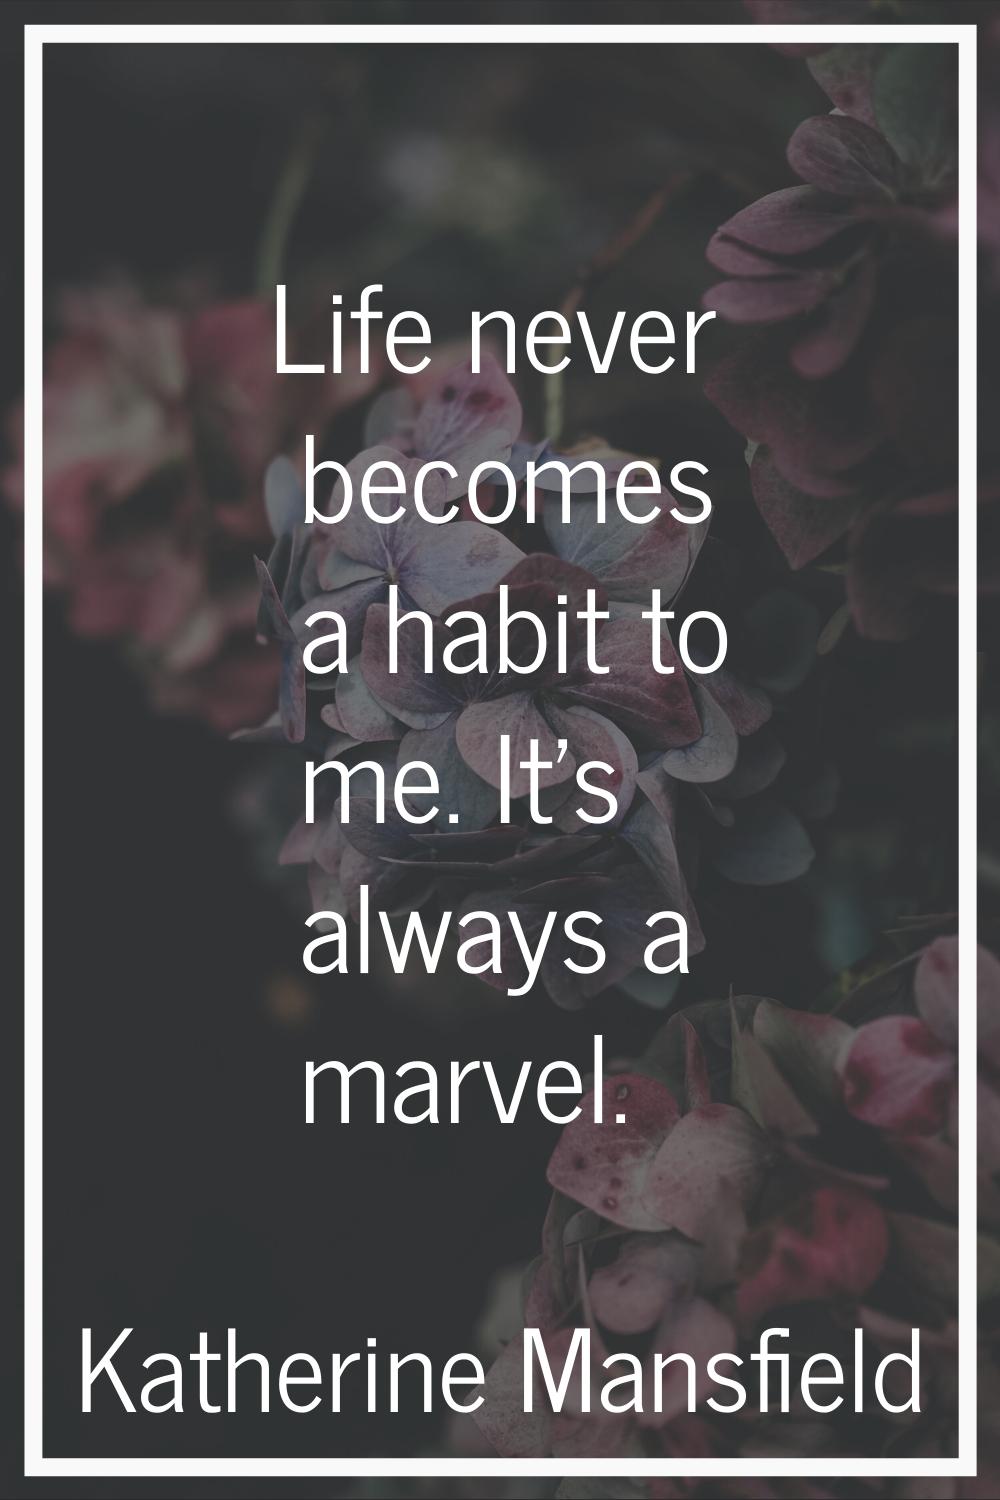 Life never becomes a habit to me. It's always a marvel.